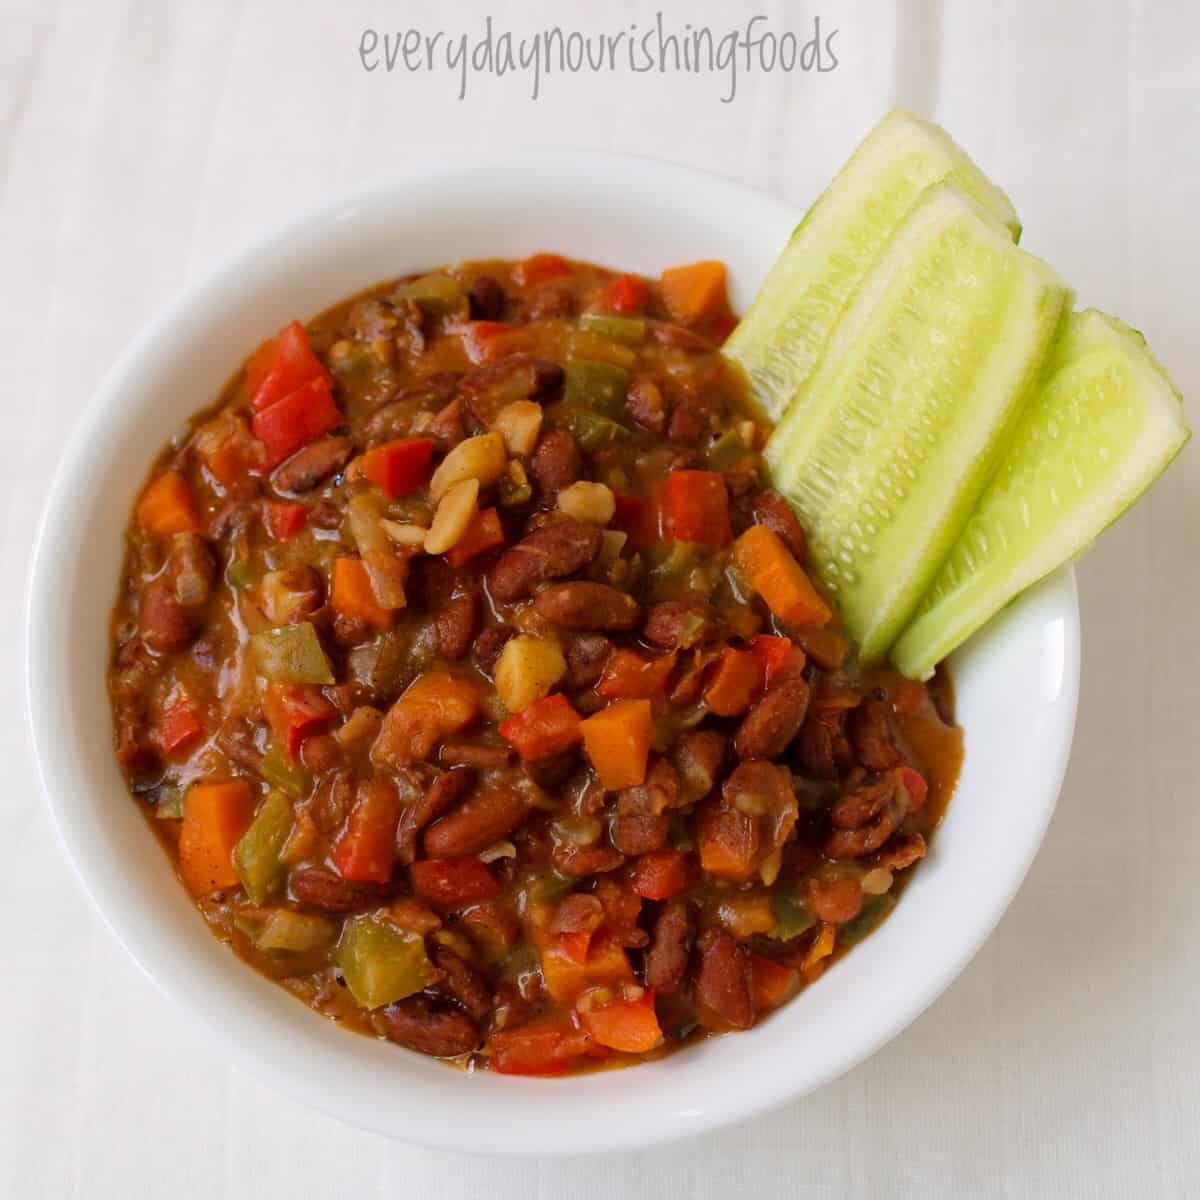 Vegetarian chili in a bowl